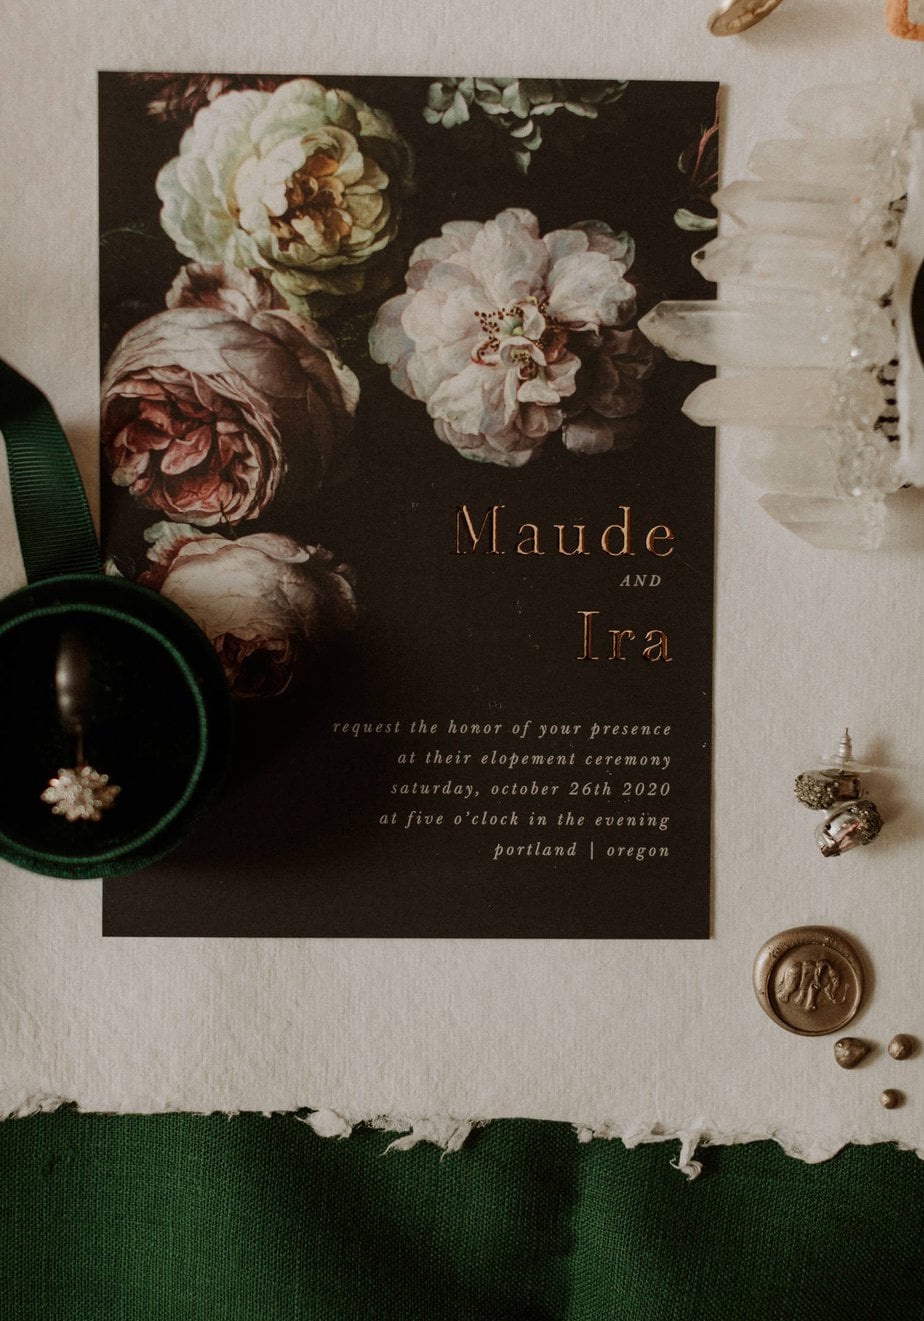 Moody floral wedding invitation for an eloping couple in Oregon. Velvet green ring box holds the wedding rings and the brides quartz hairpiece was handmade by bride for her adventure elopement